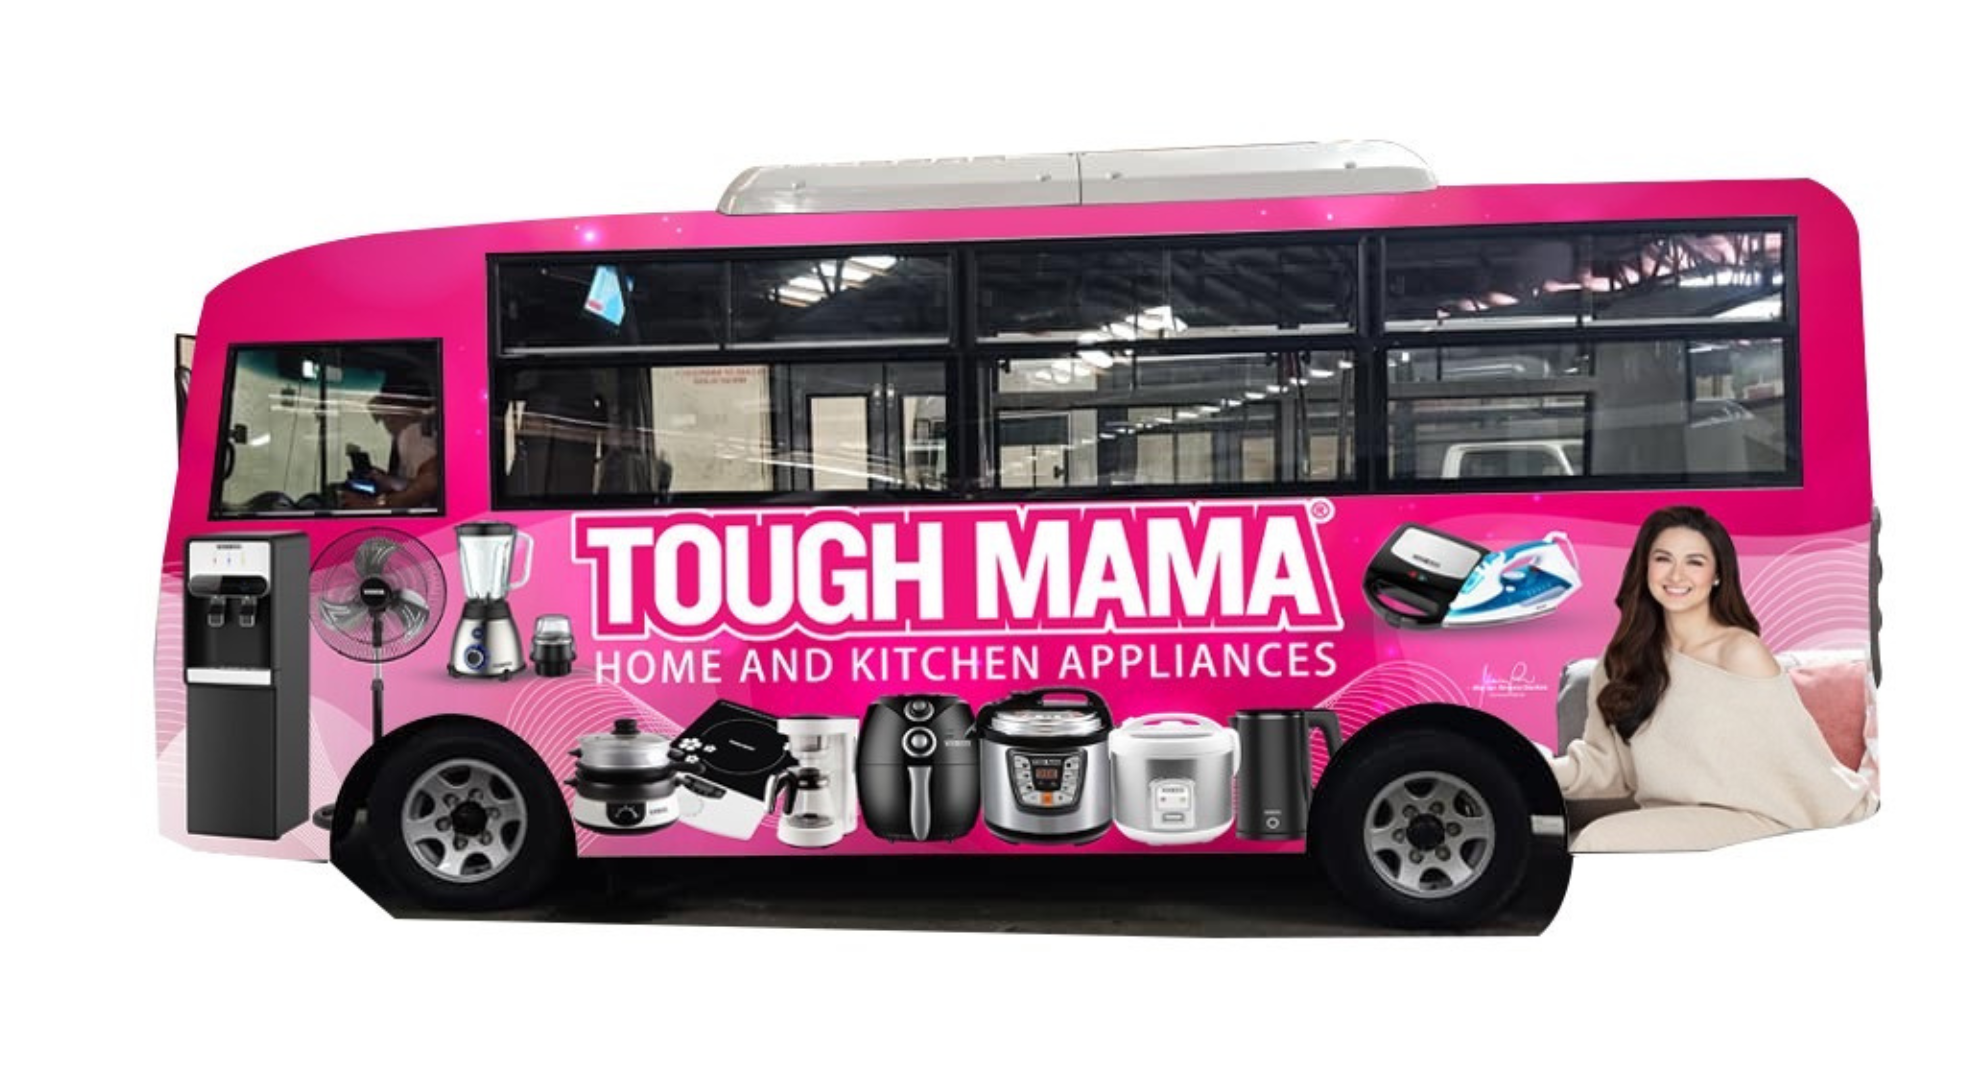 Tough Mama Appliances launches ‘Libreng Sakay’ initiative to celebrate women and empower communities this June